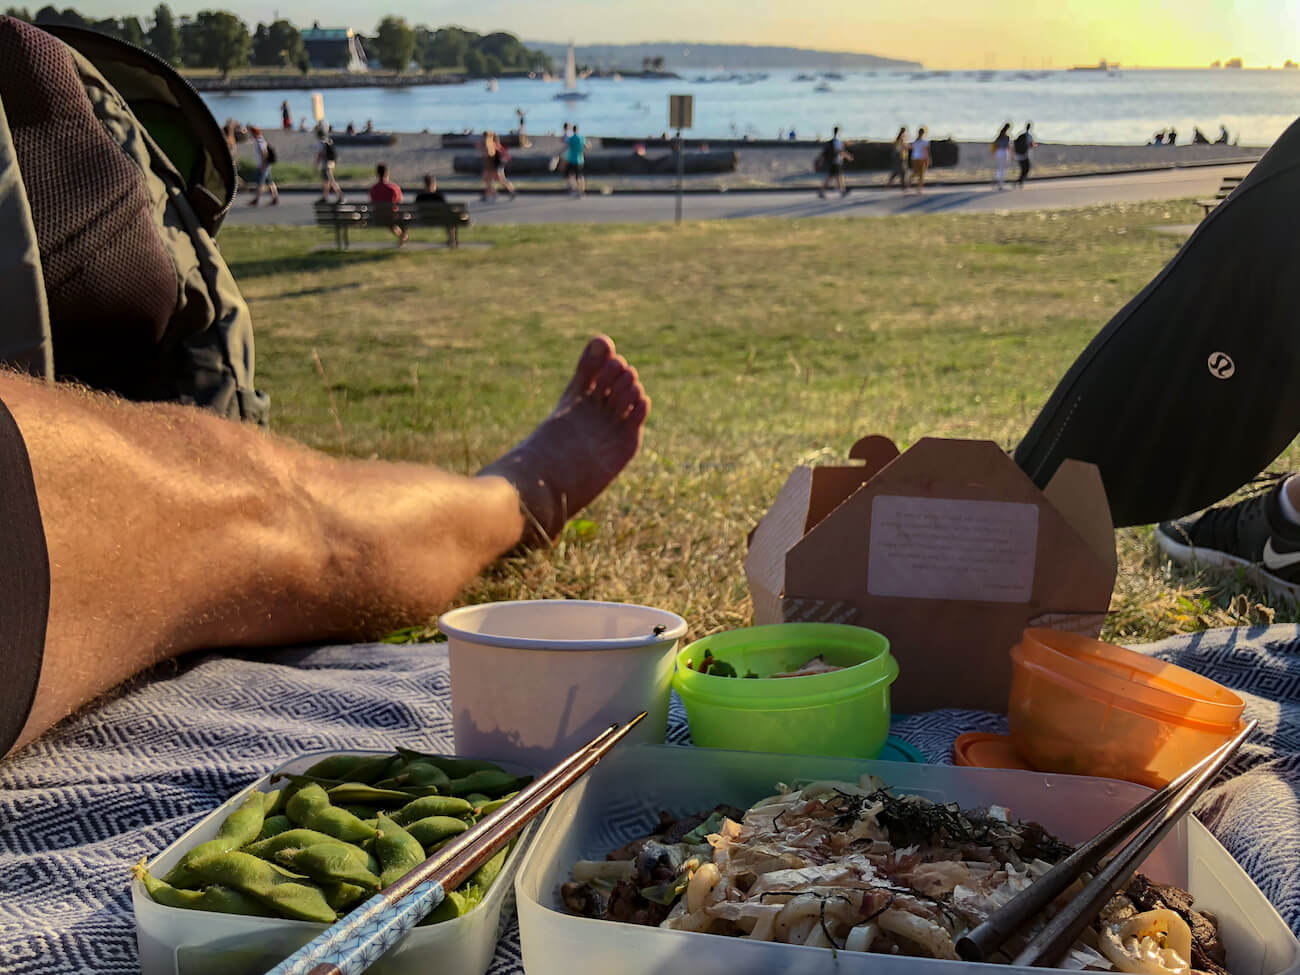 The food, sunset, and beach at a recent picnic we had at Sunset Beach